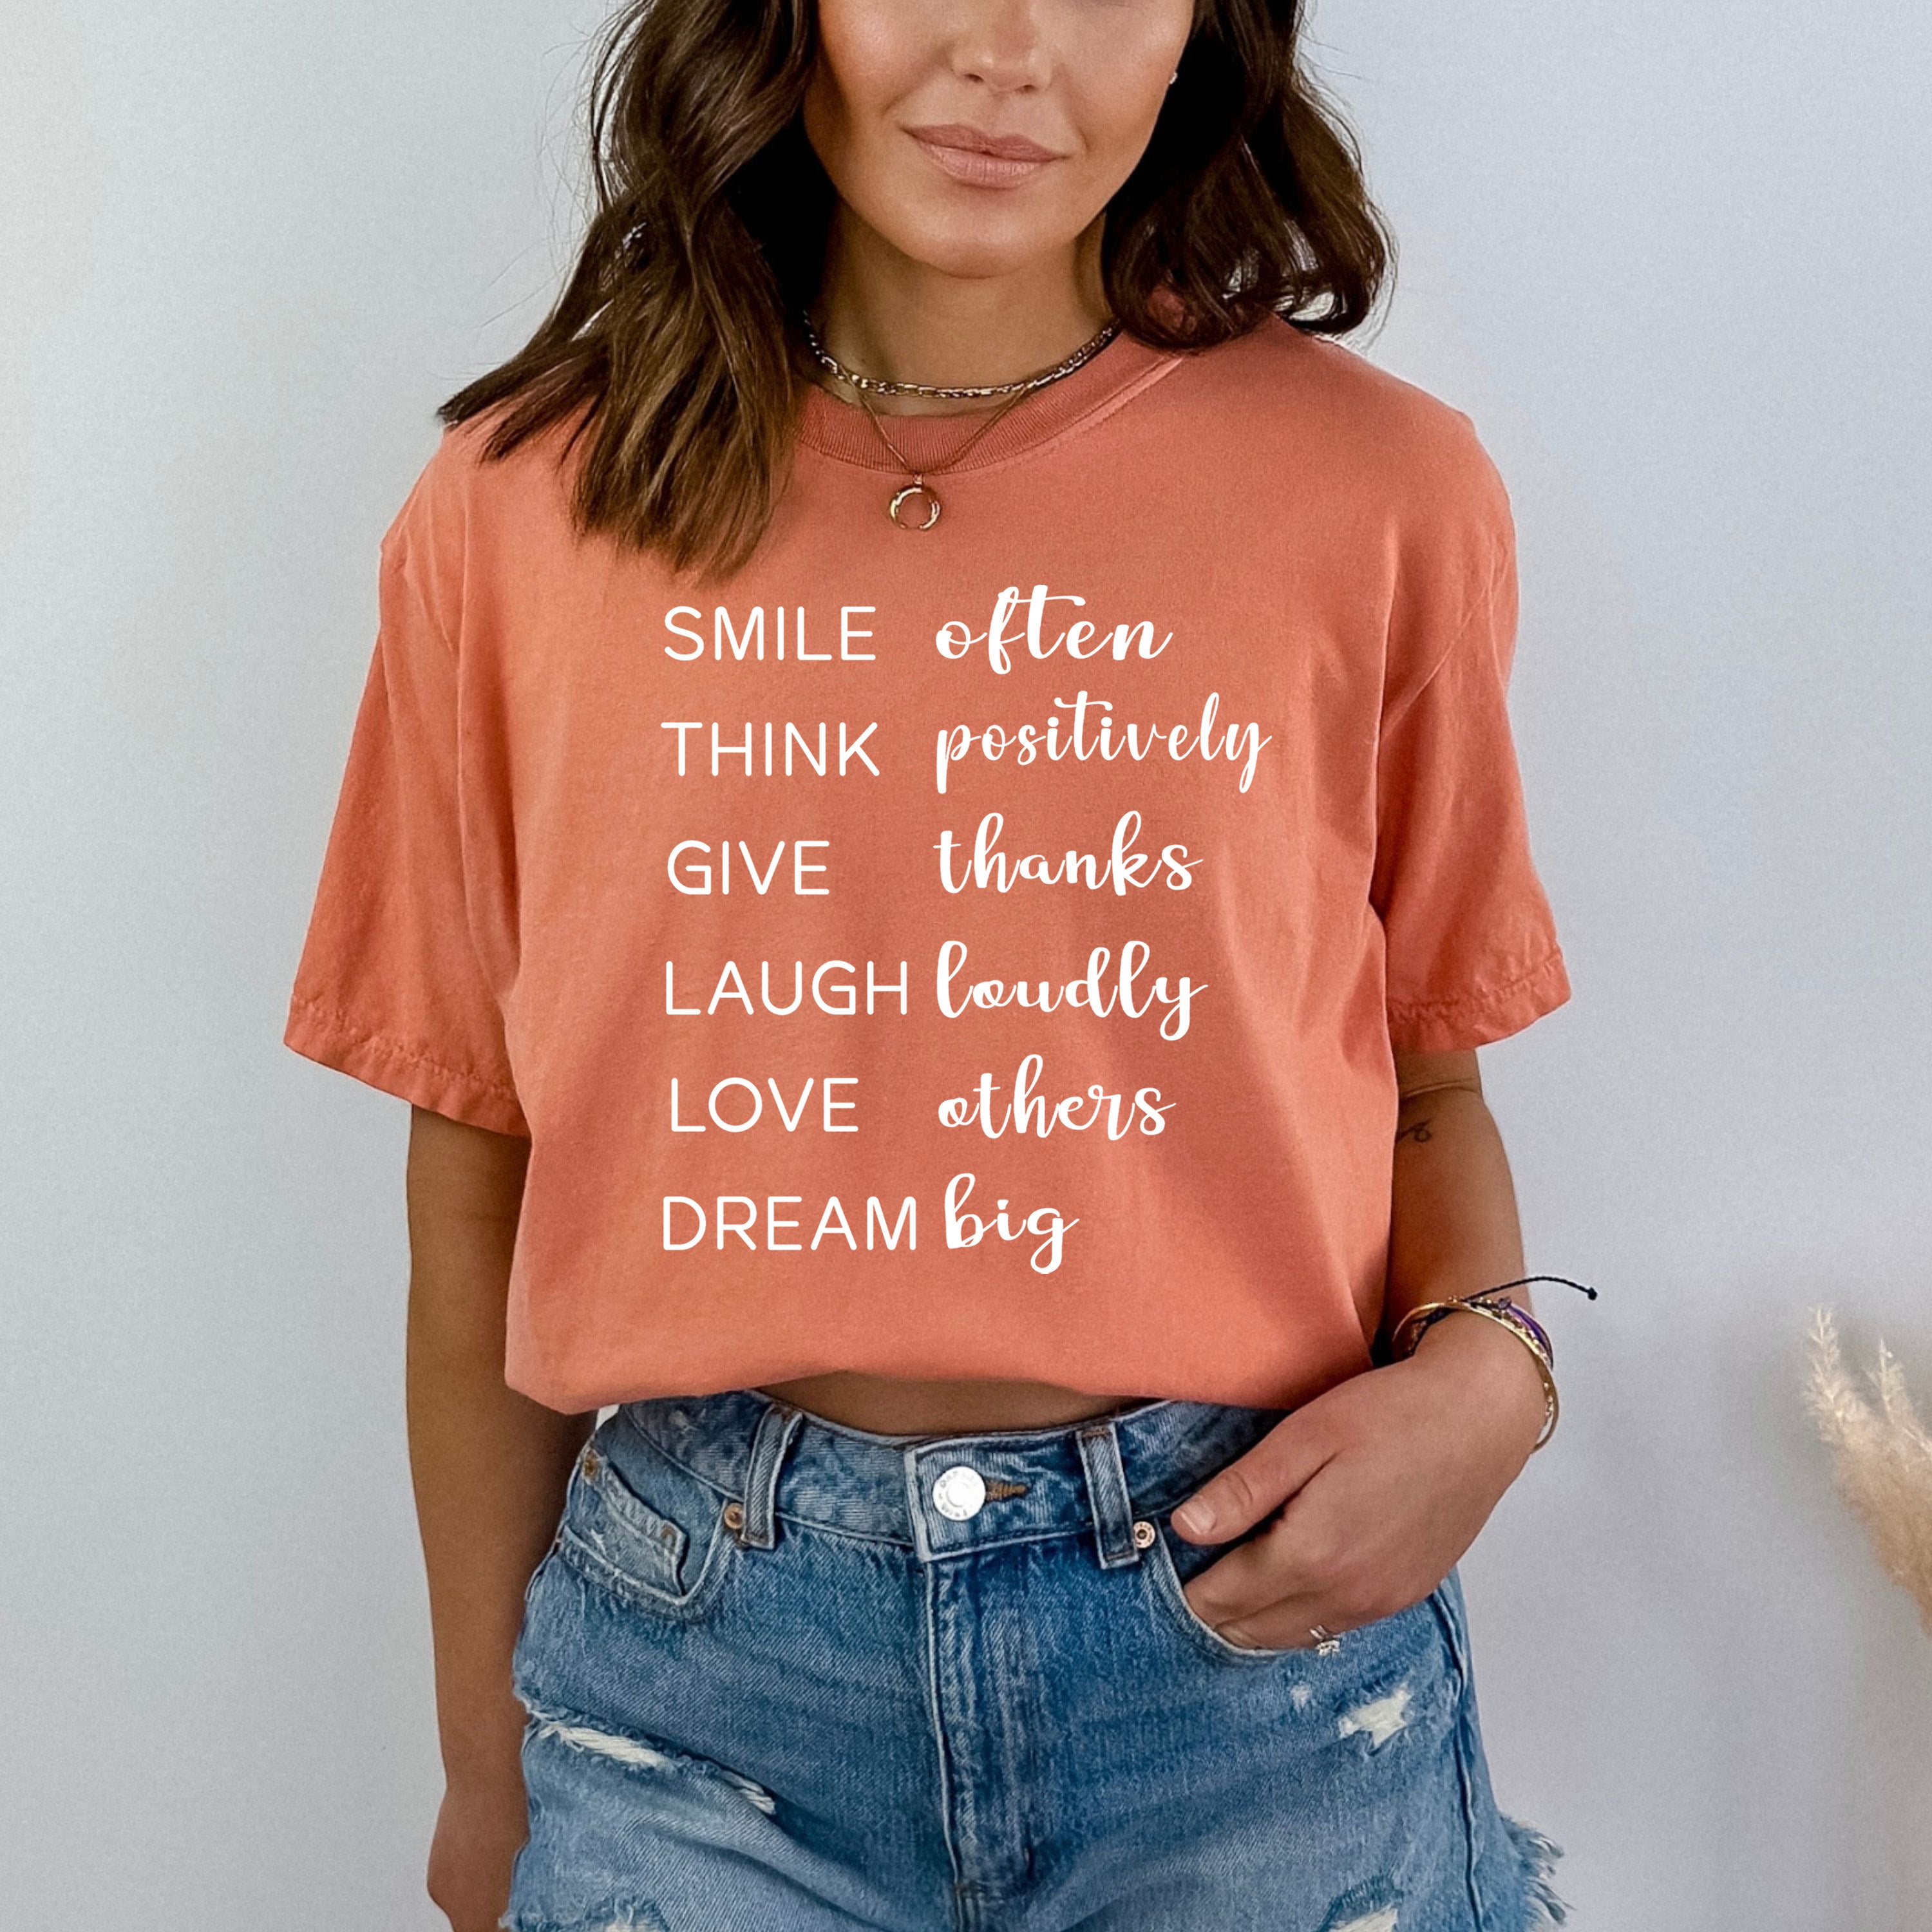 Give Thanks Laugh Loudly - Bella canvas